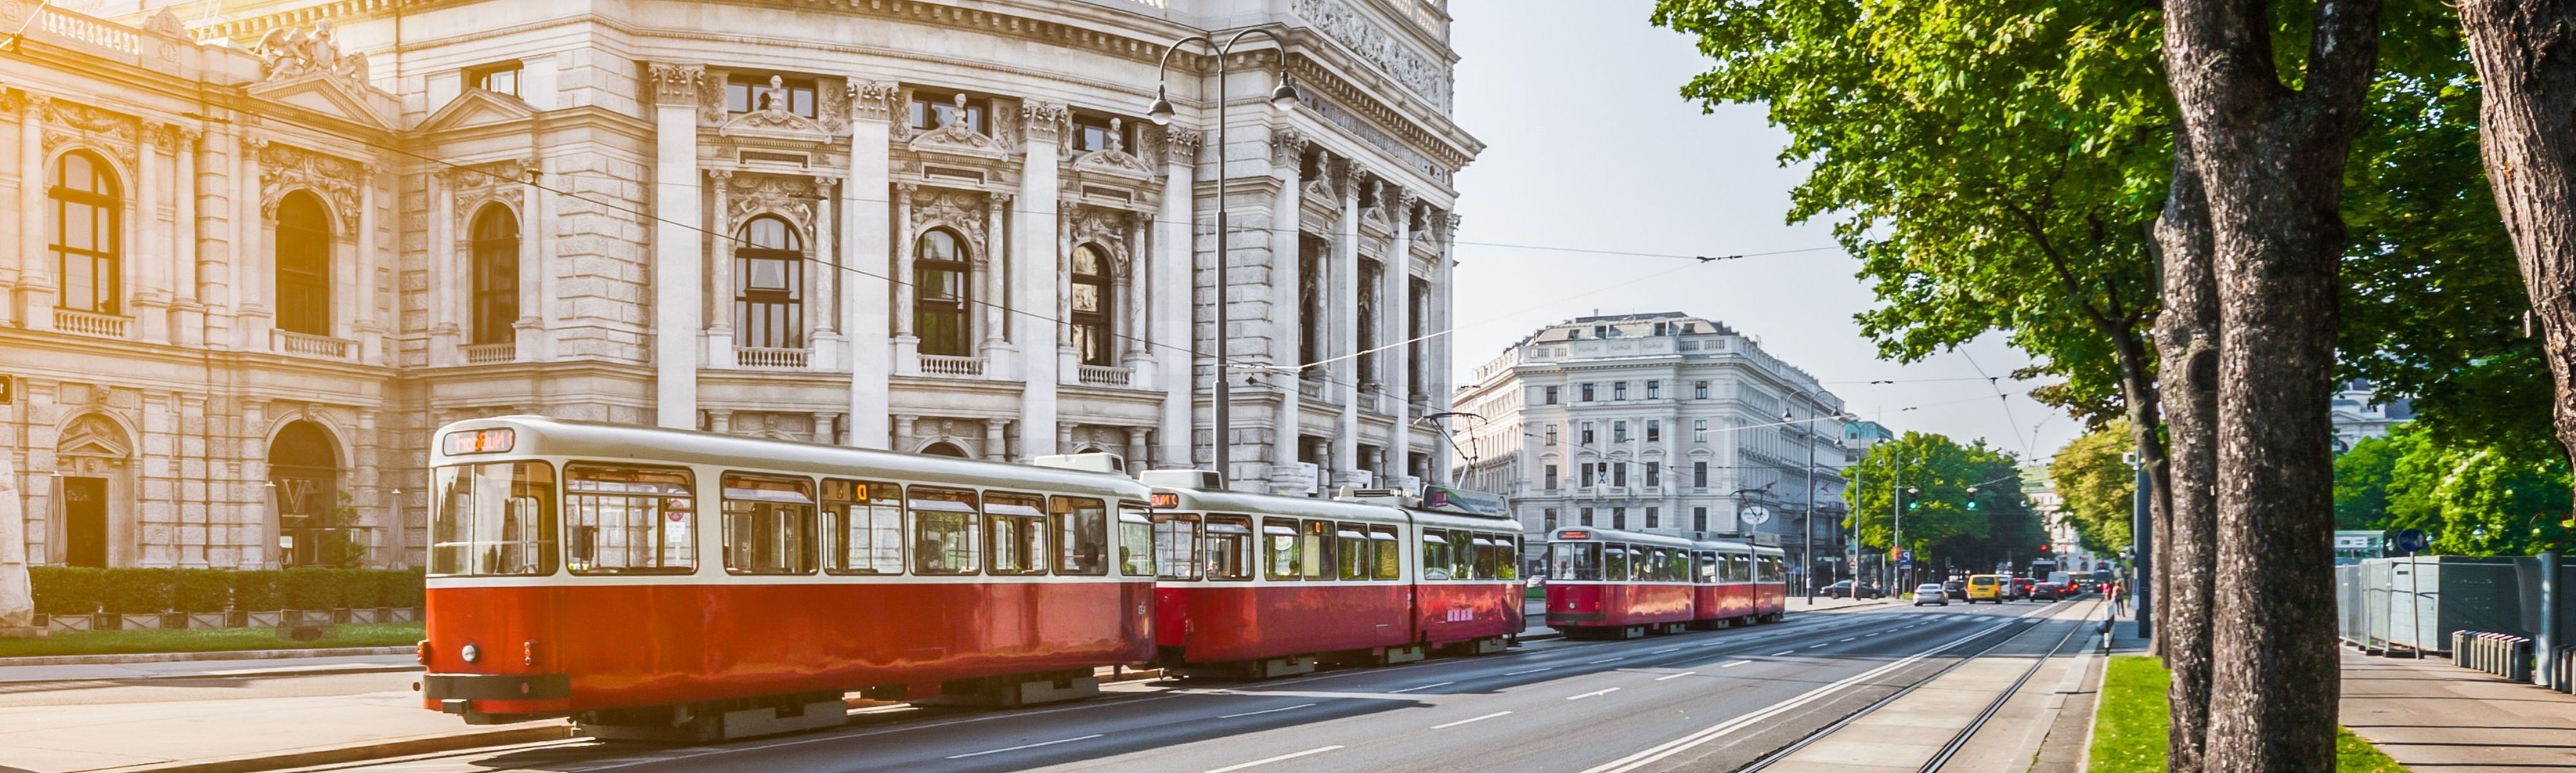 red cable cars riding down street in vienna budapest in front of wiener ringstrasse